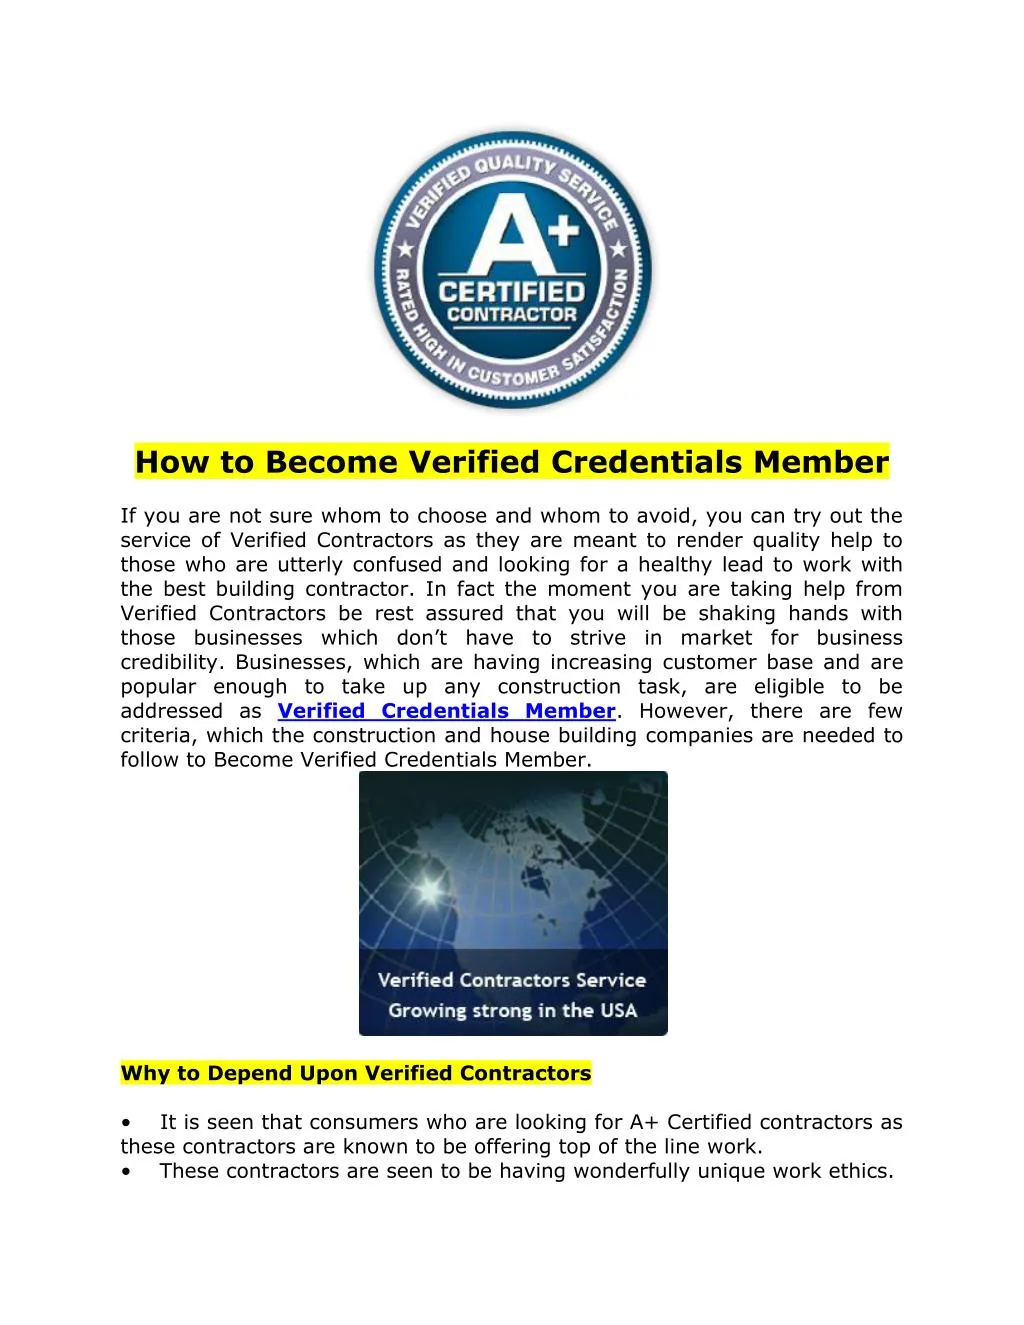 how to become verified credentials member